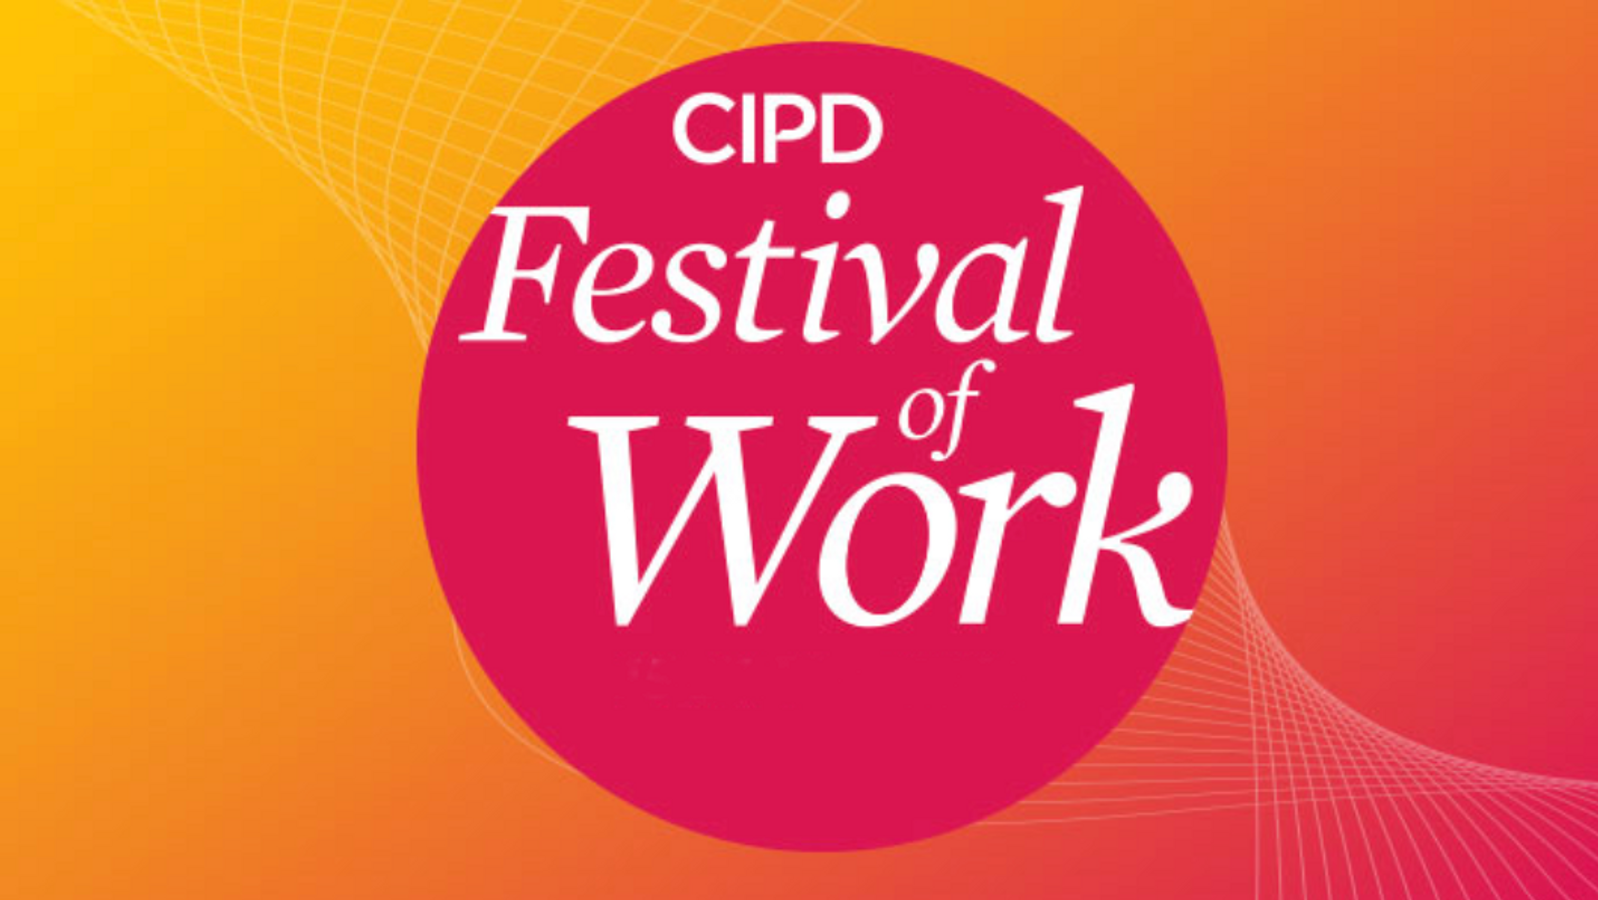 CIPD Festival of Work – Meet the Cornerstone Team this June at the Olympia